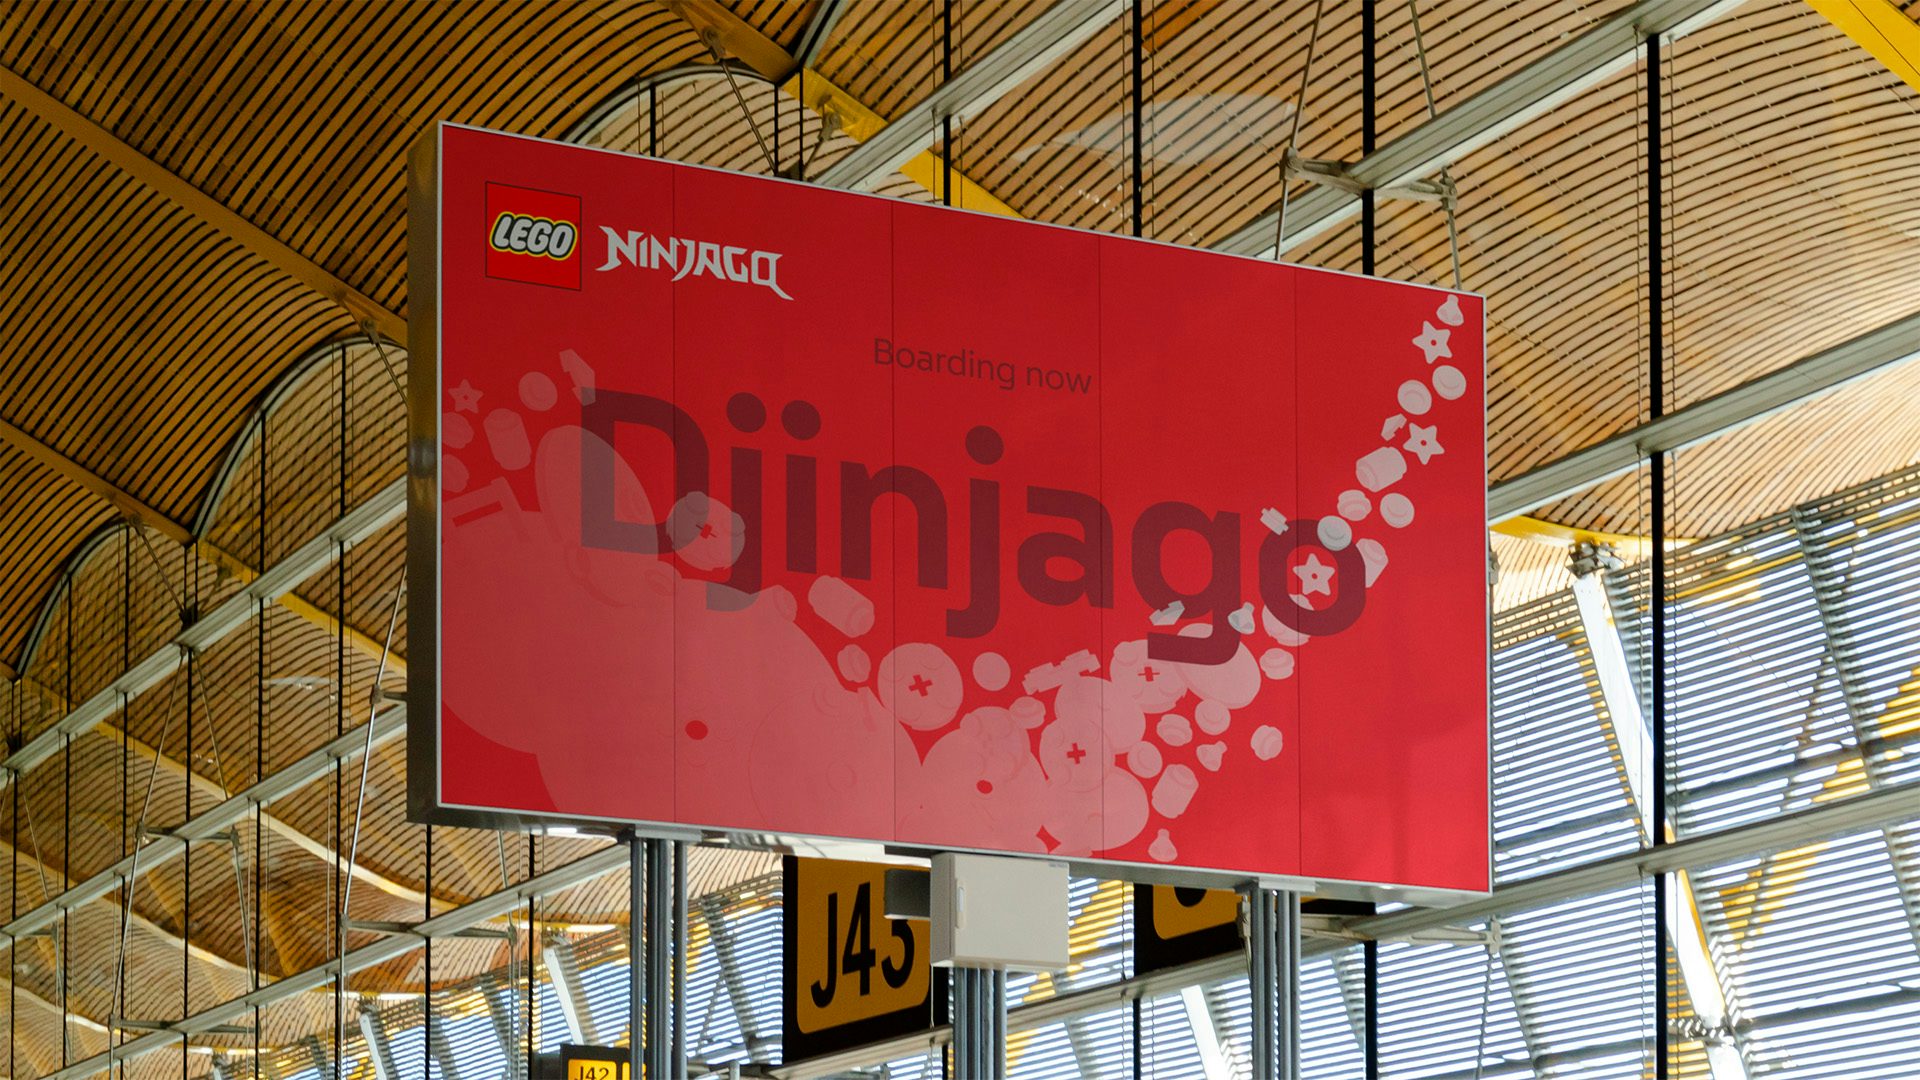 Image shows a large red horizontal poster that reads 'Djinjago' suspended from a wood panelled ceiling